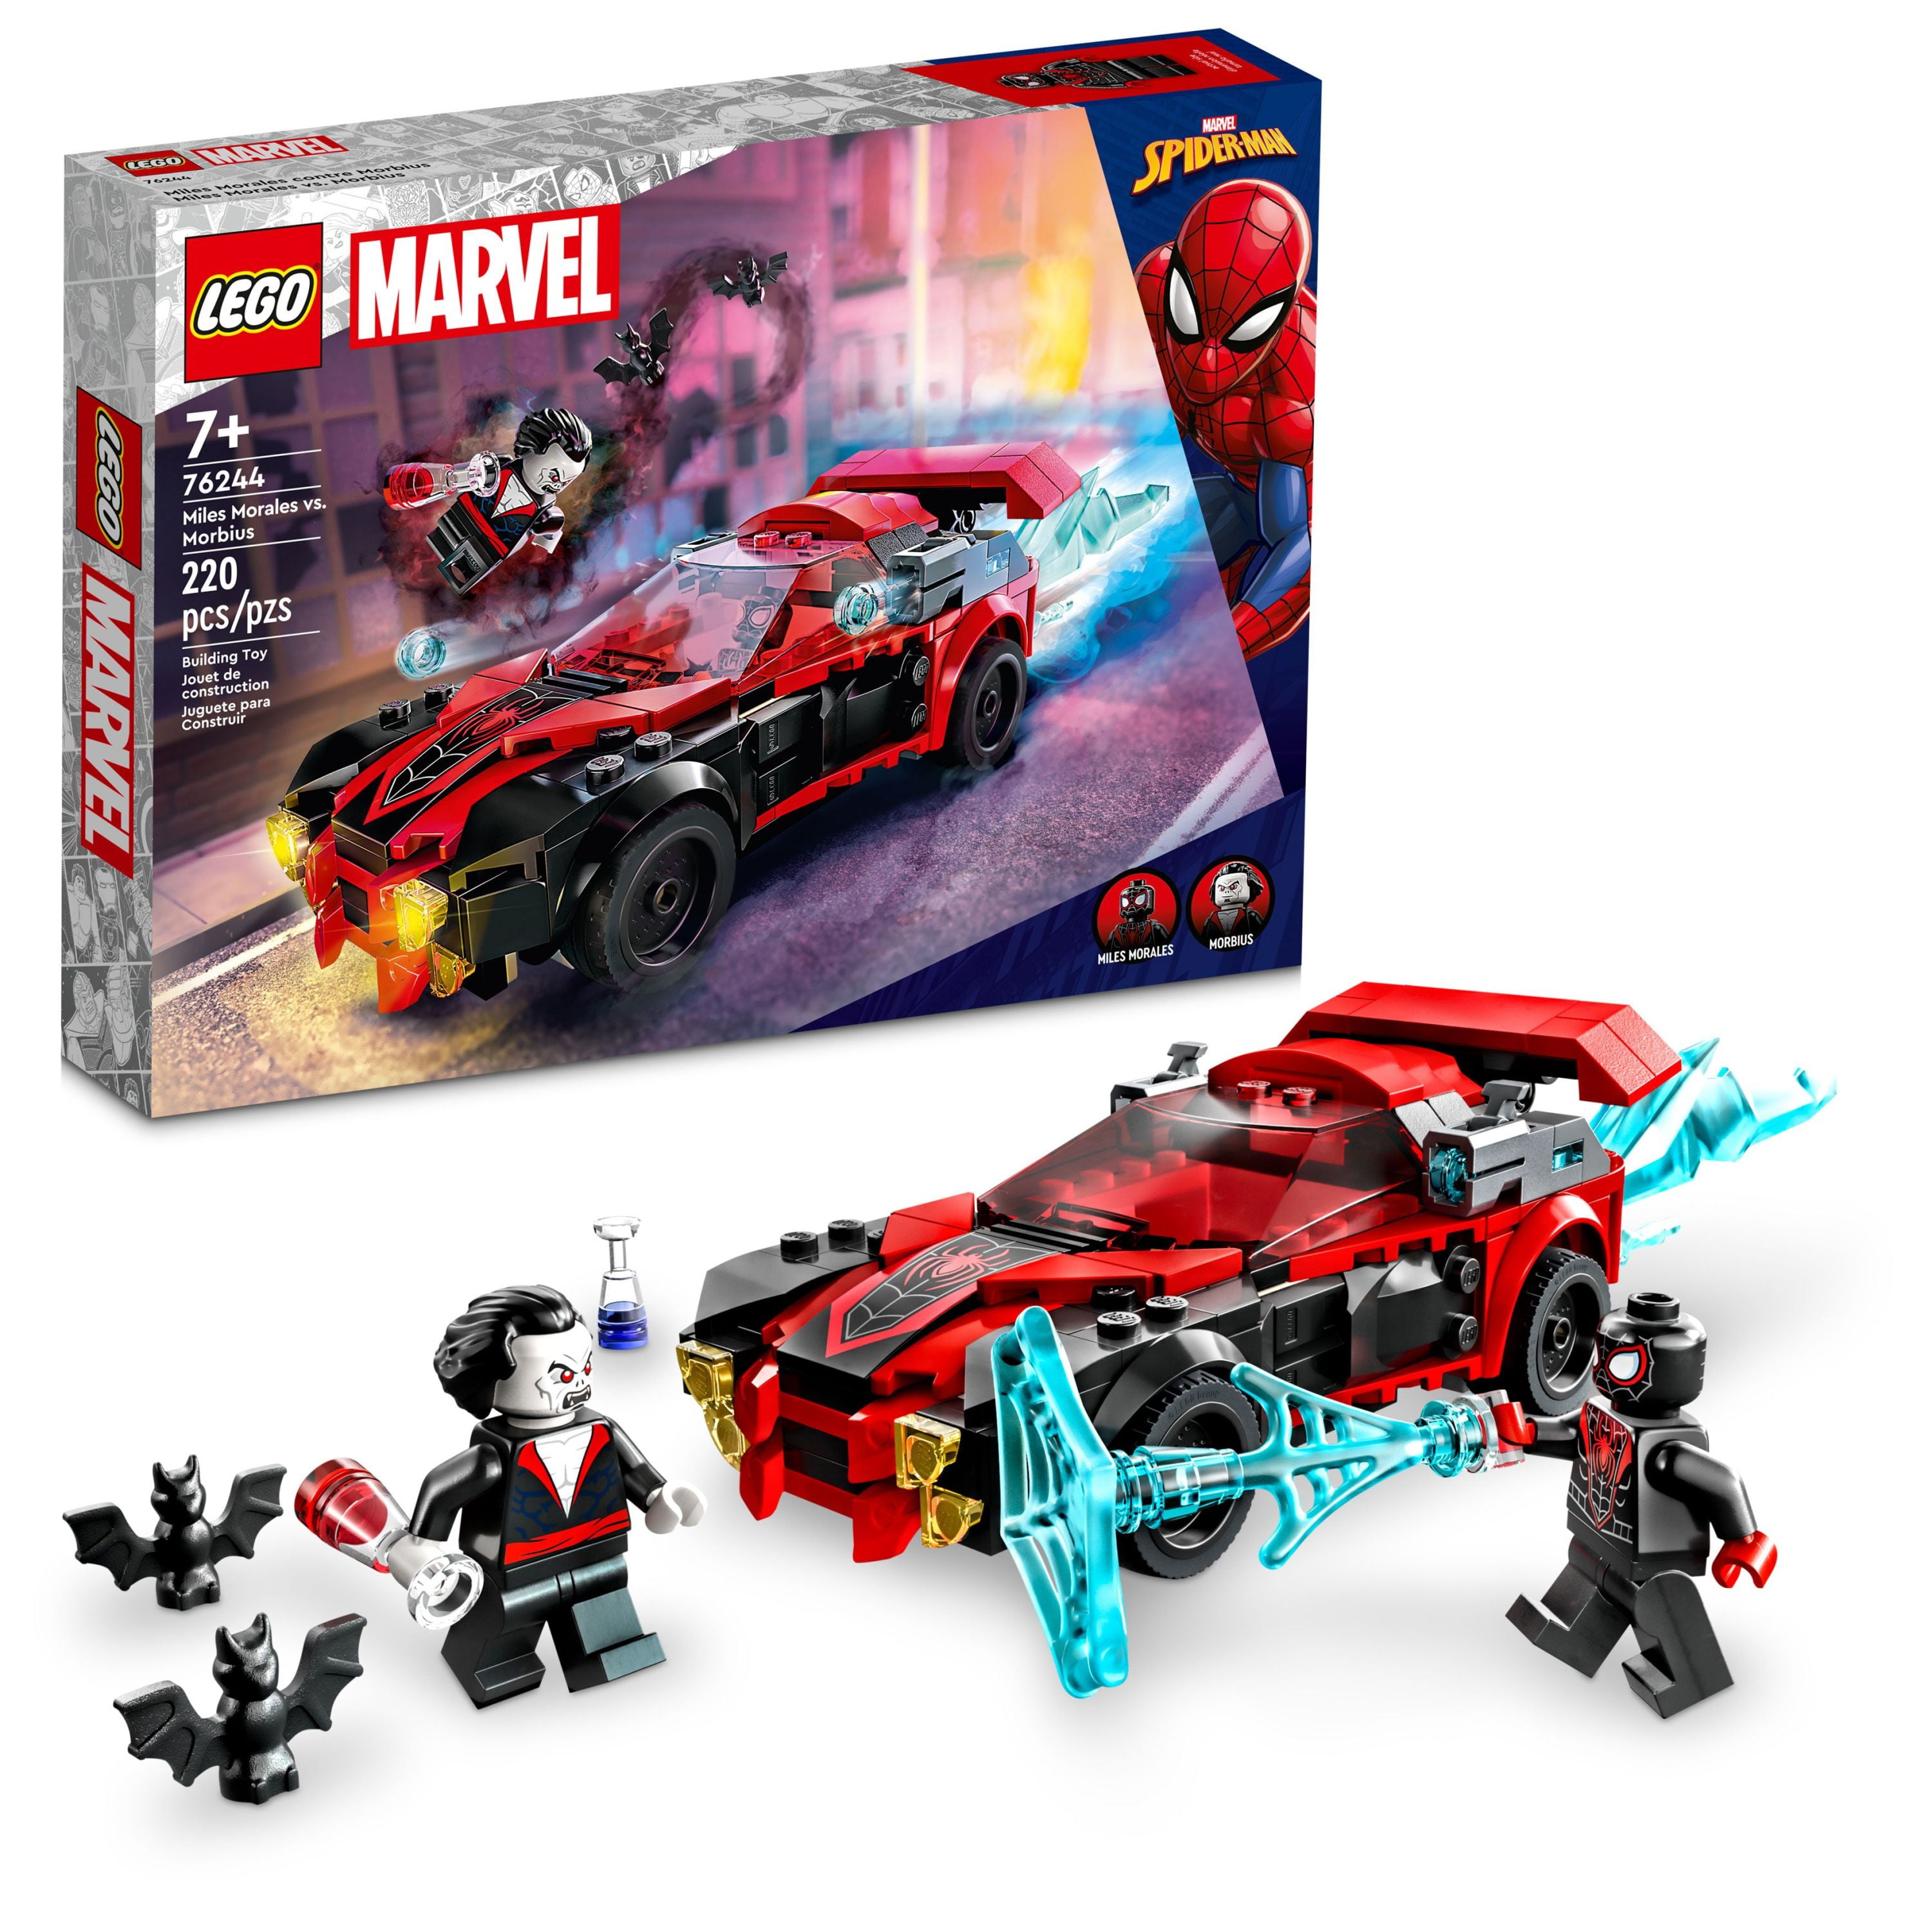 LEGO Marvel Spider-Man Miles Morales vs. Morbius 76244 Building Toy - Featuring Race Car and Action Minifigures, in The Spiderverse, Movie Inspired Set, Fun for Boys, and Kids -